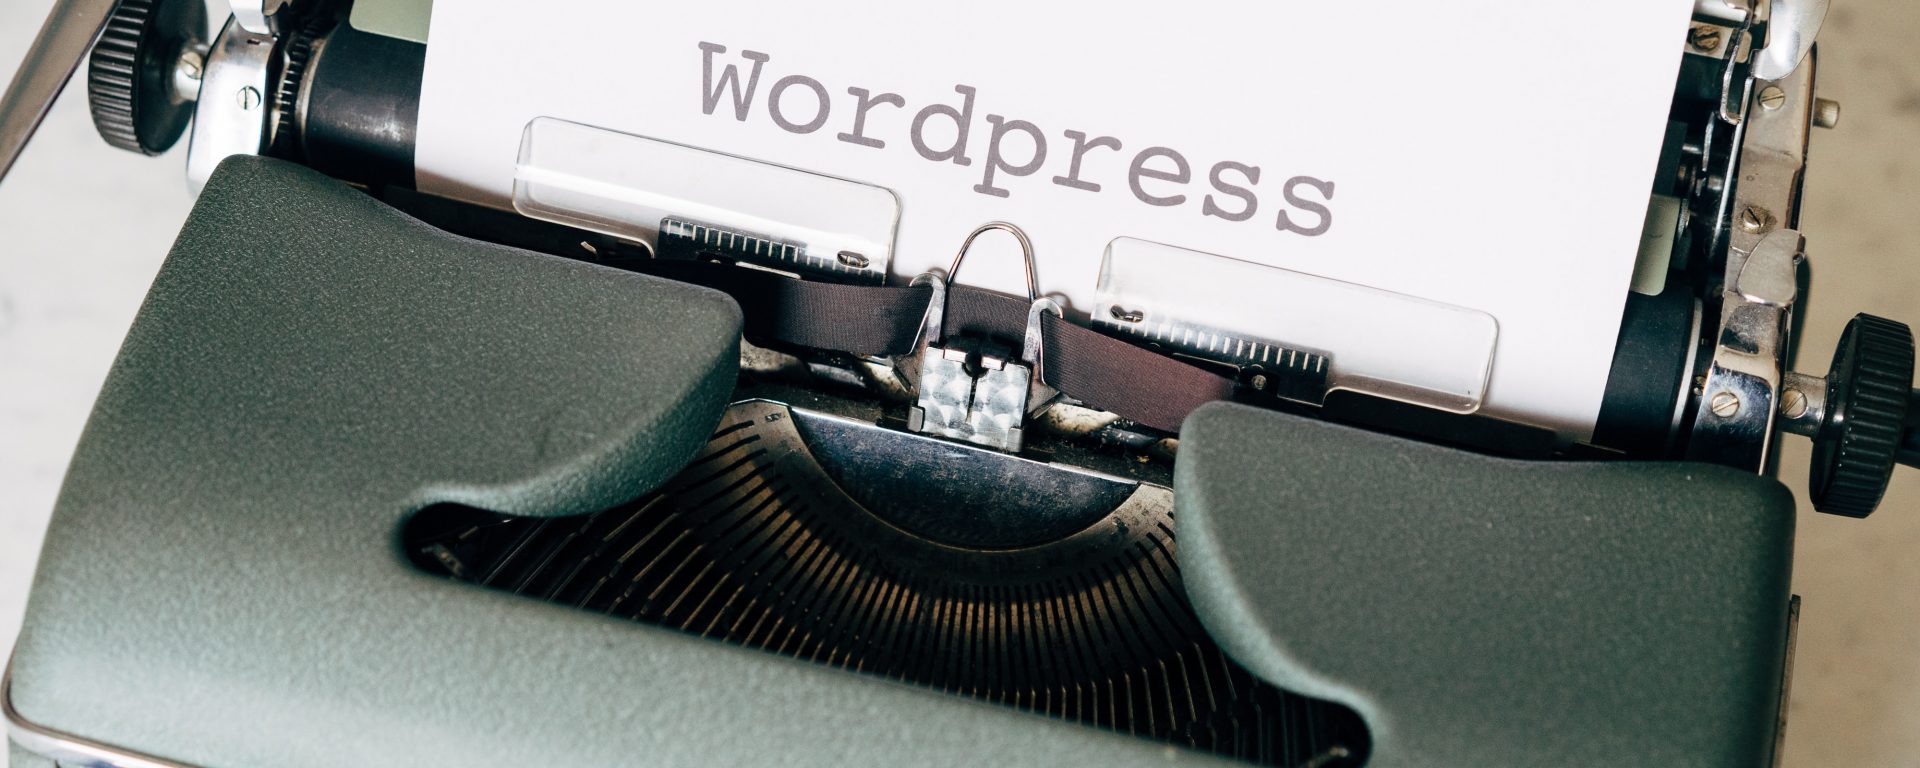 typewriter with the word WordPress typed on a piece of white paper